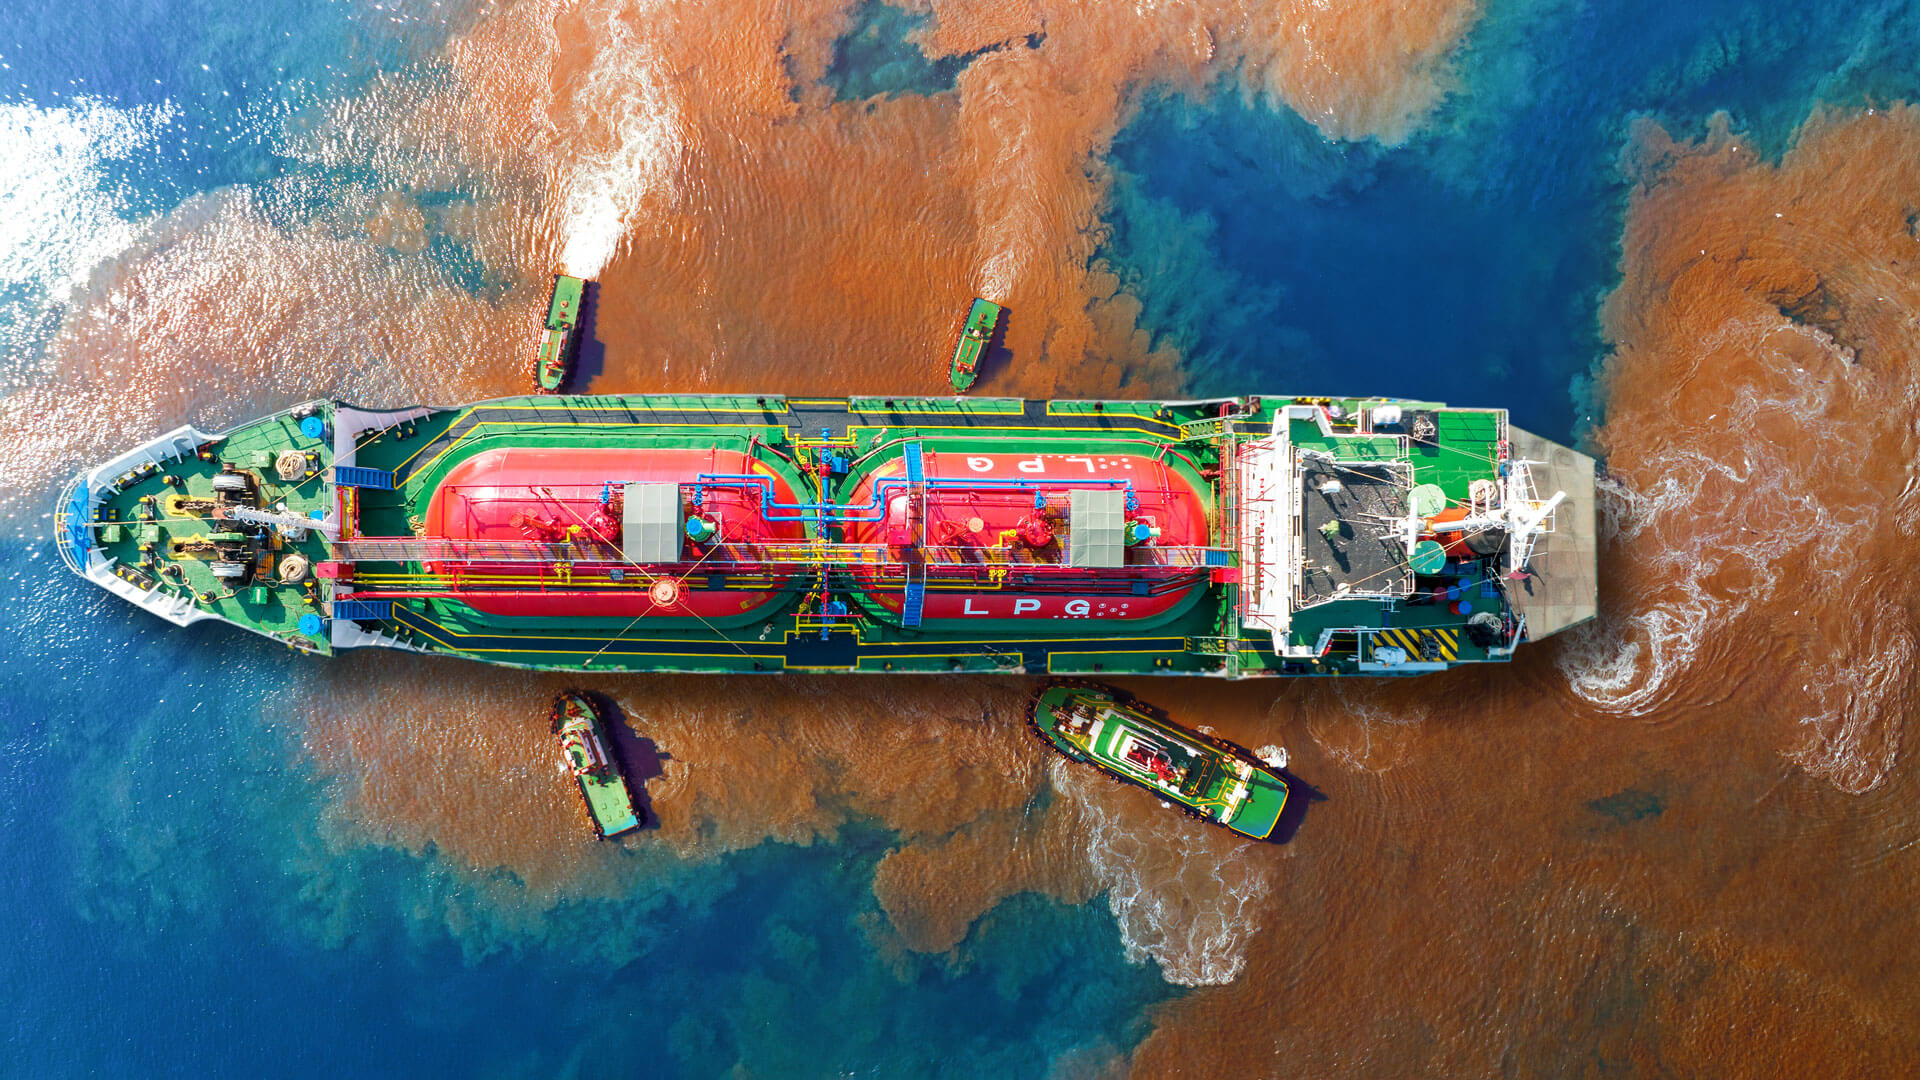 An aerial view of an oil tanker that is spewing oil into the ocean as cleanup crews respond.